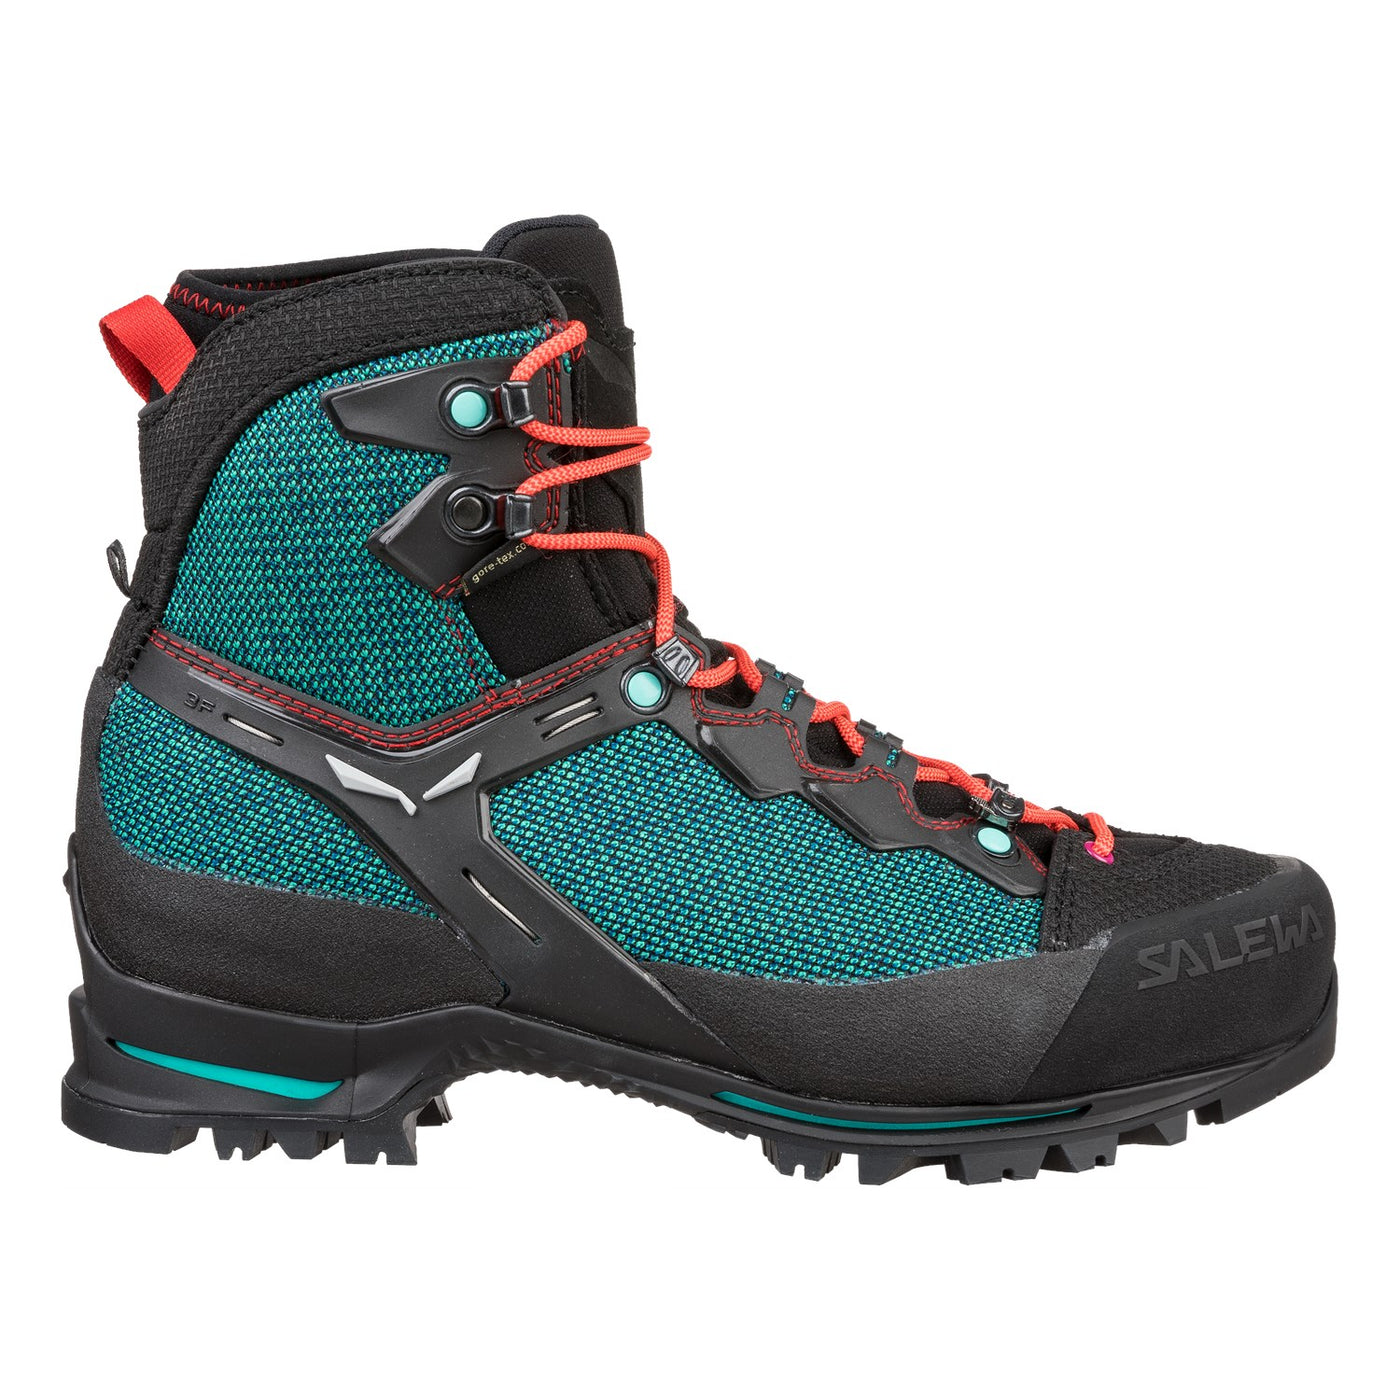 Salewa Raven 3 Gore-Tex Womens | Hiking and Mountaineering Boots | NZ